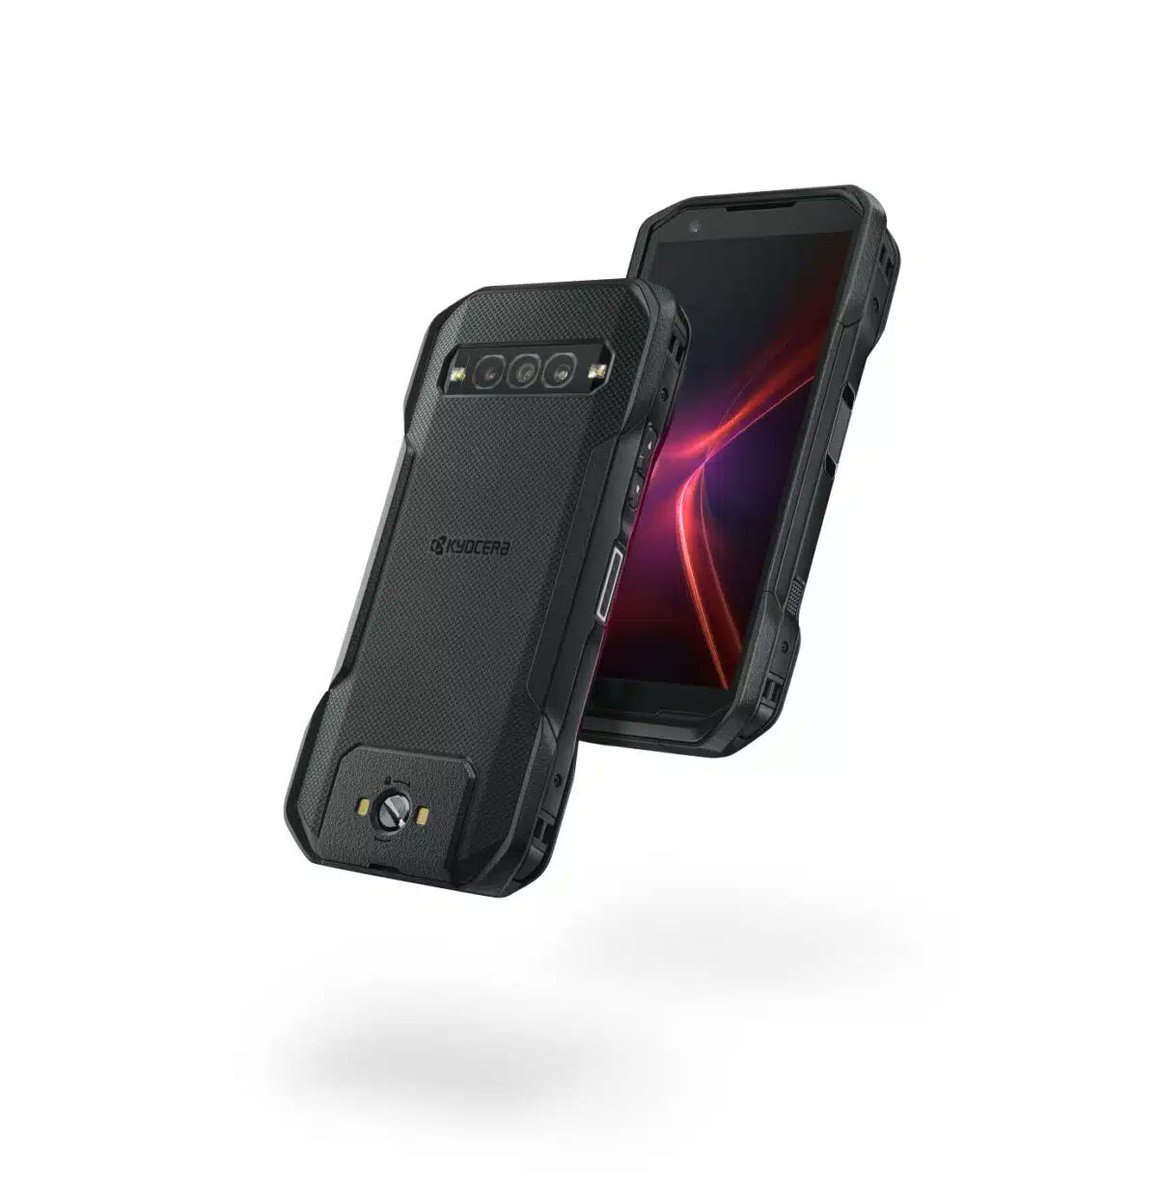 hightechminion.com/kyocera-durafo…
Kyocera has just unveiled the DuraForce PRO 3, an ultra-rugged Android 13 smartphone designed to withstand the toughest environments. 📱💪

#Kyocera #DuraForcePRO3 #RuggedSmartphone #Android13 #5GConnectivity #Reliability #Durability